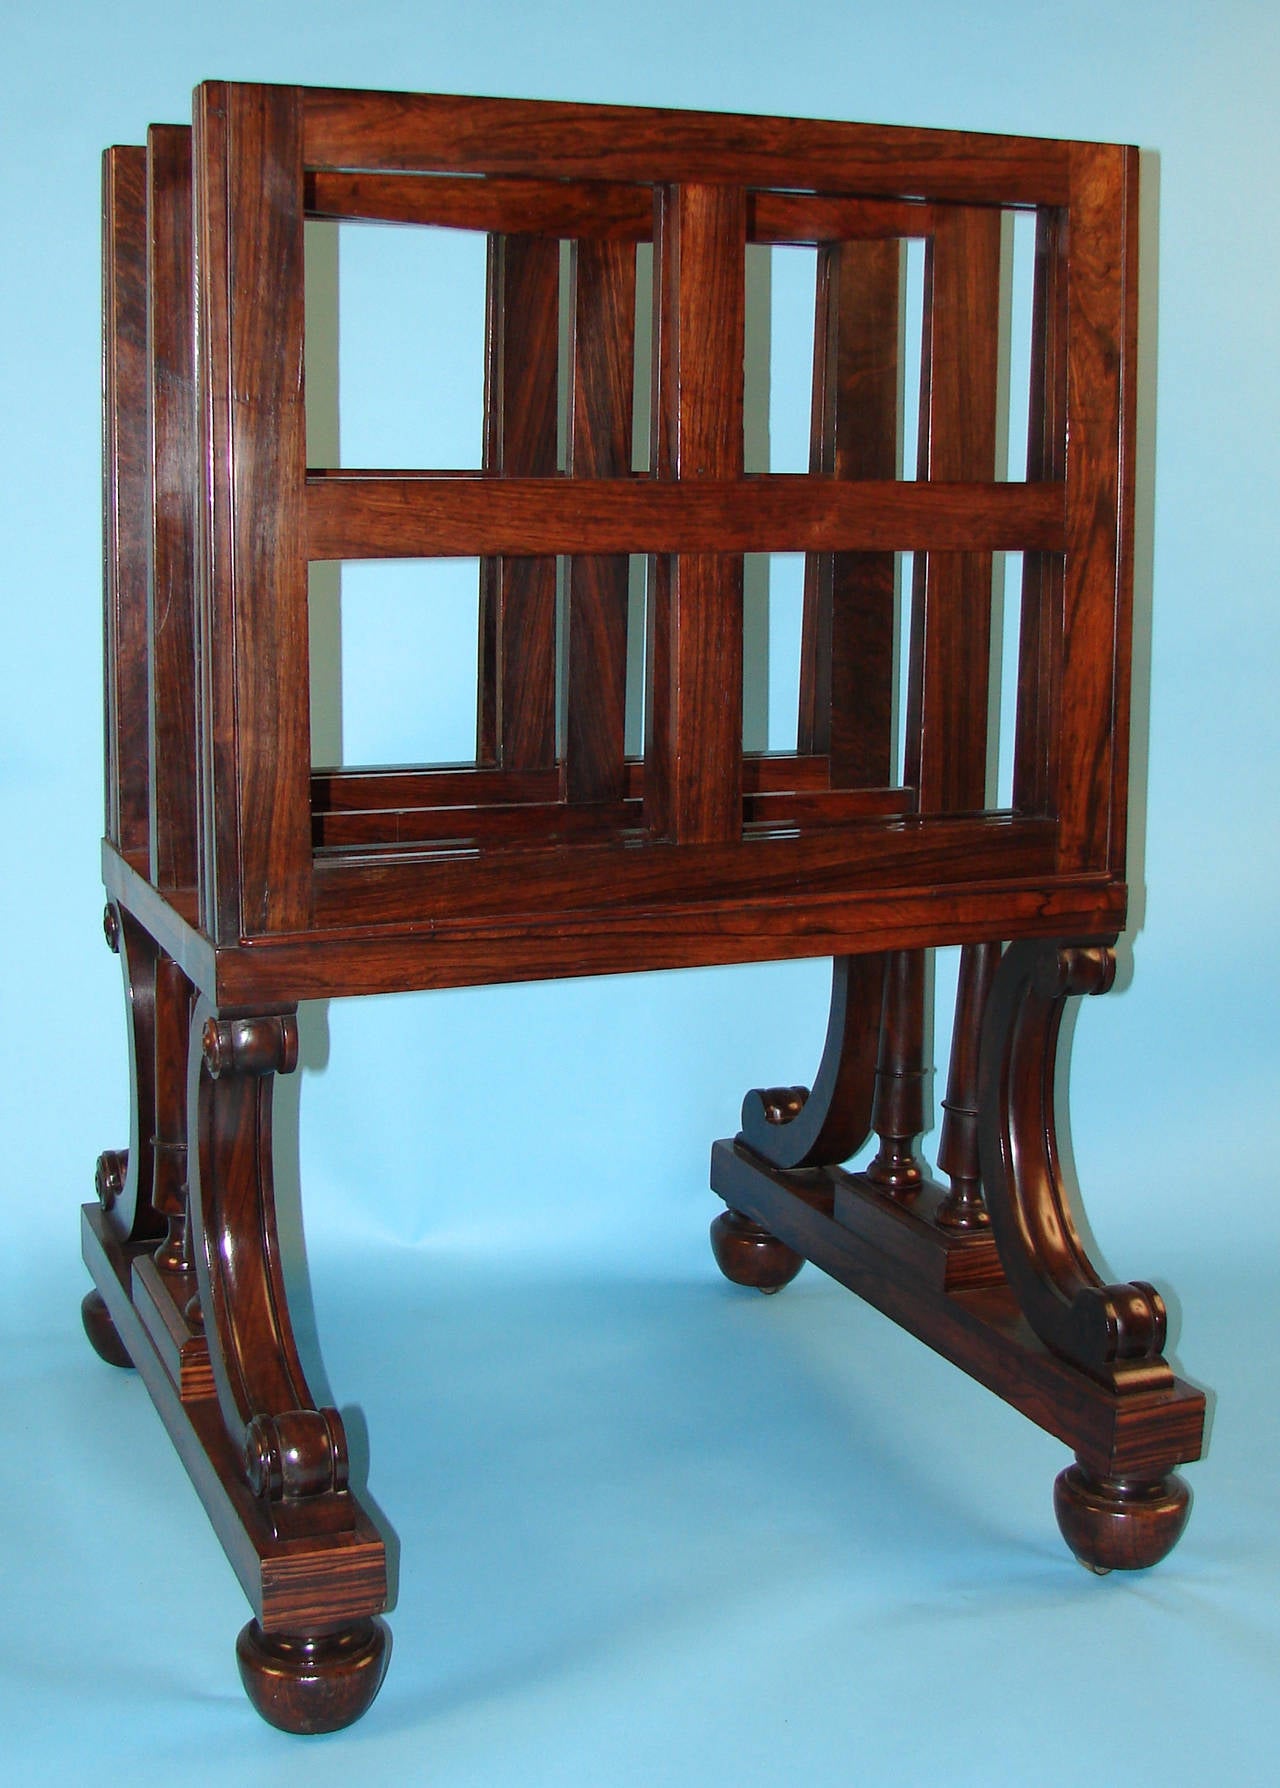 A fine quality William IV period rosewood folio stand, the two-section top with adjustable supports on each side, the Stand supported by molded down swept legs on bun feet with recessed brass casters. In the manner of Gillows, circa 1840.